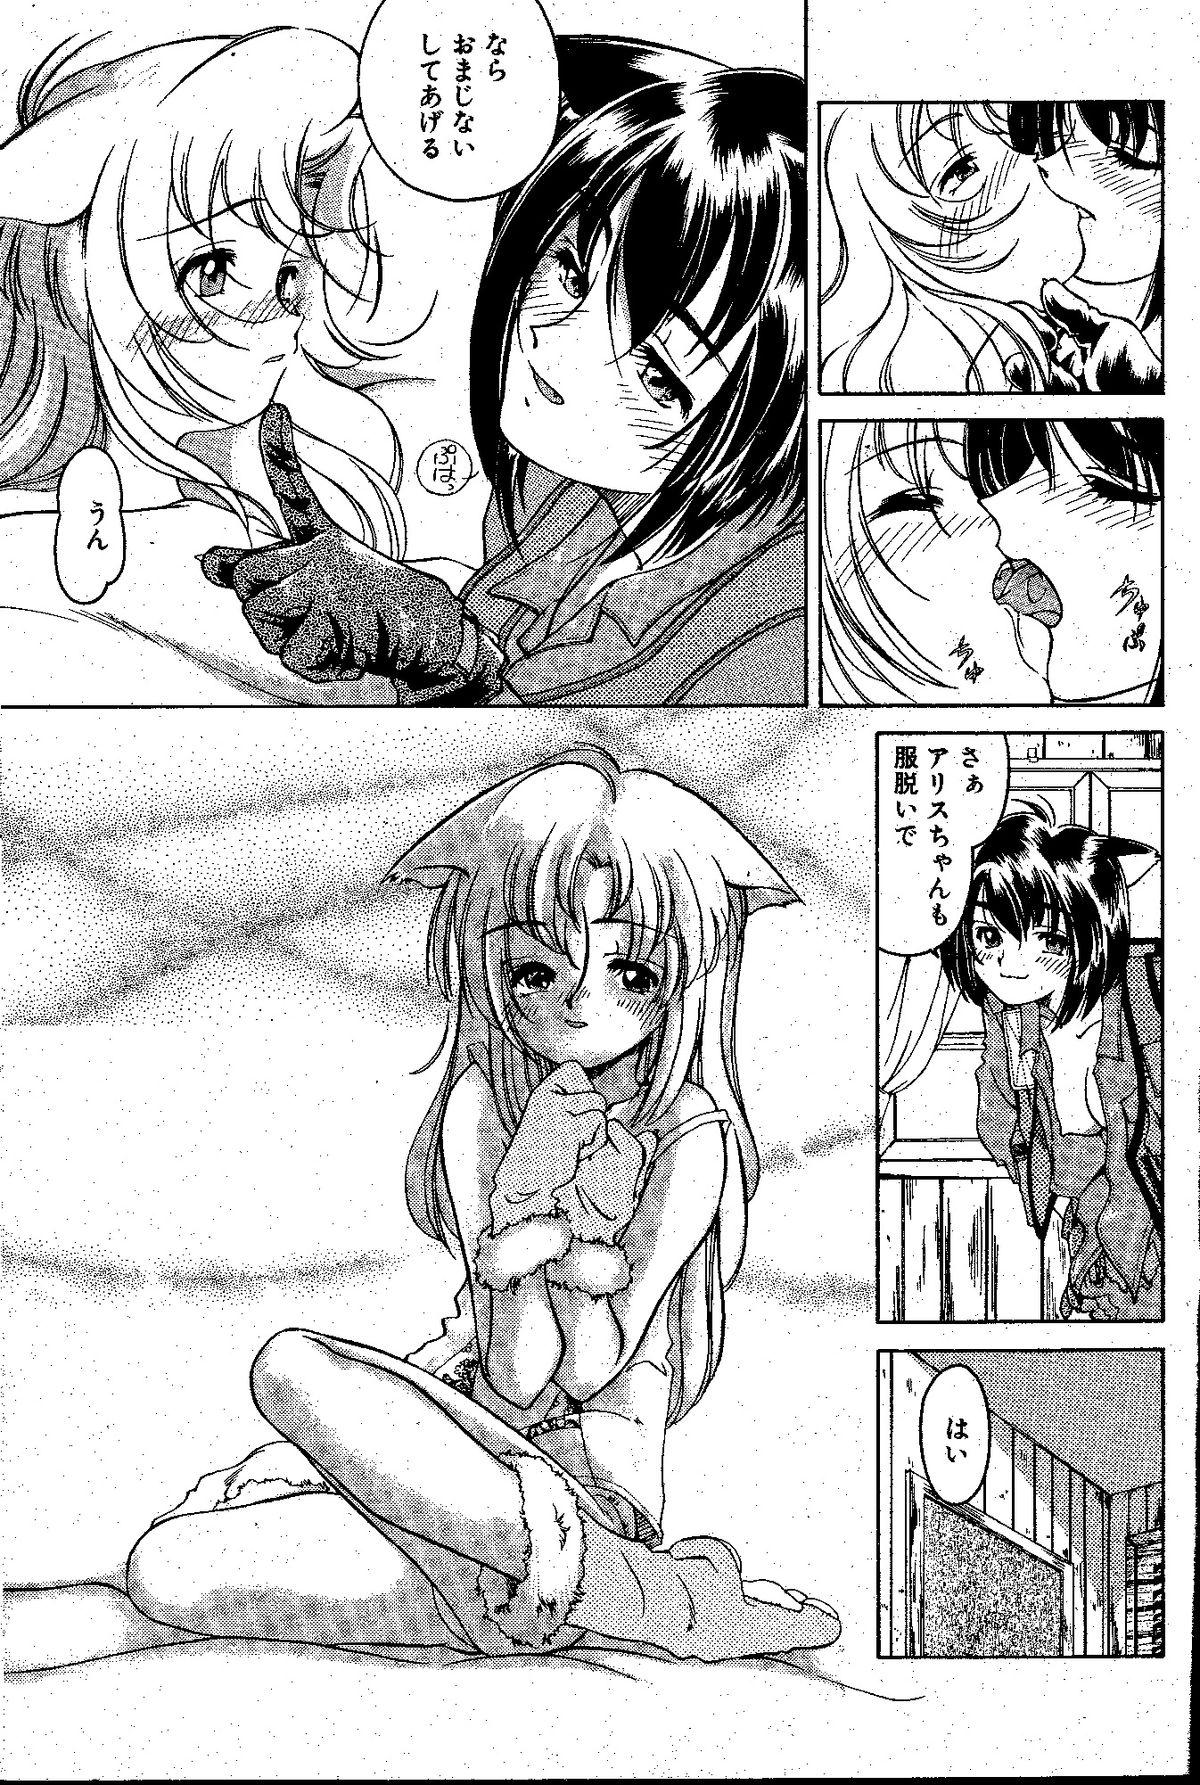 nyan-a-kore [Last page has imperfect lines] 8